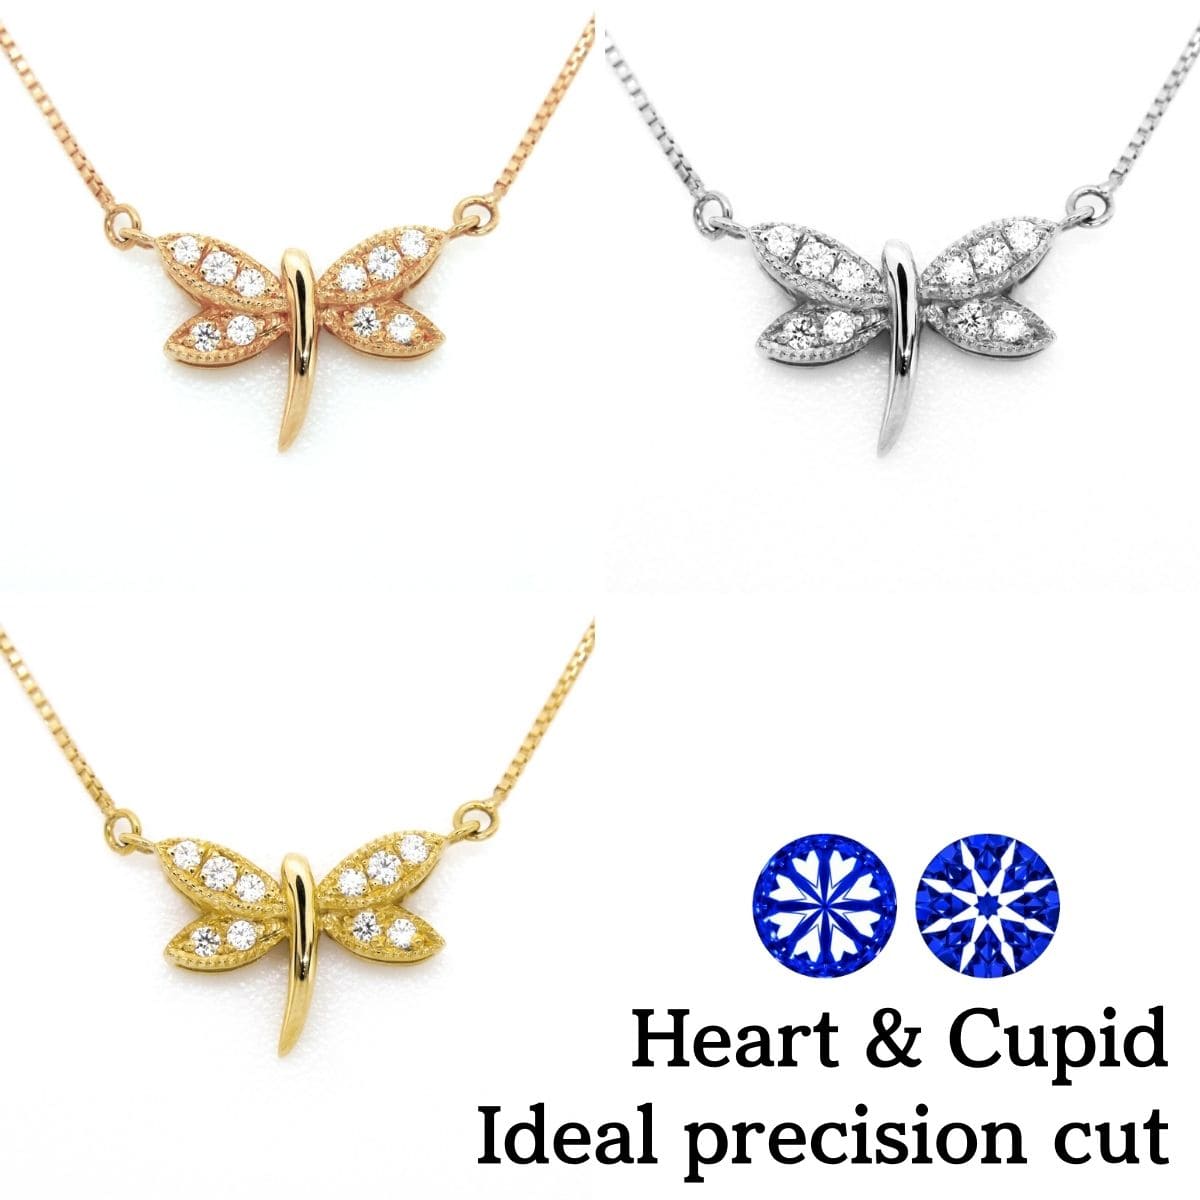 Dragonfly diamondnecklace K18pinkgold Platinum900 K18yellowgold non-allergenic heart&cupid Ideal precision cut